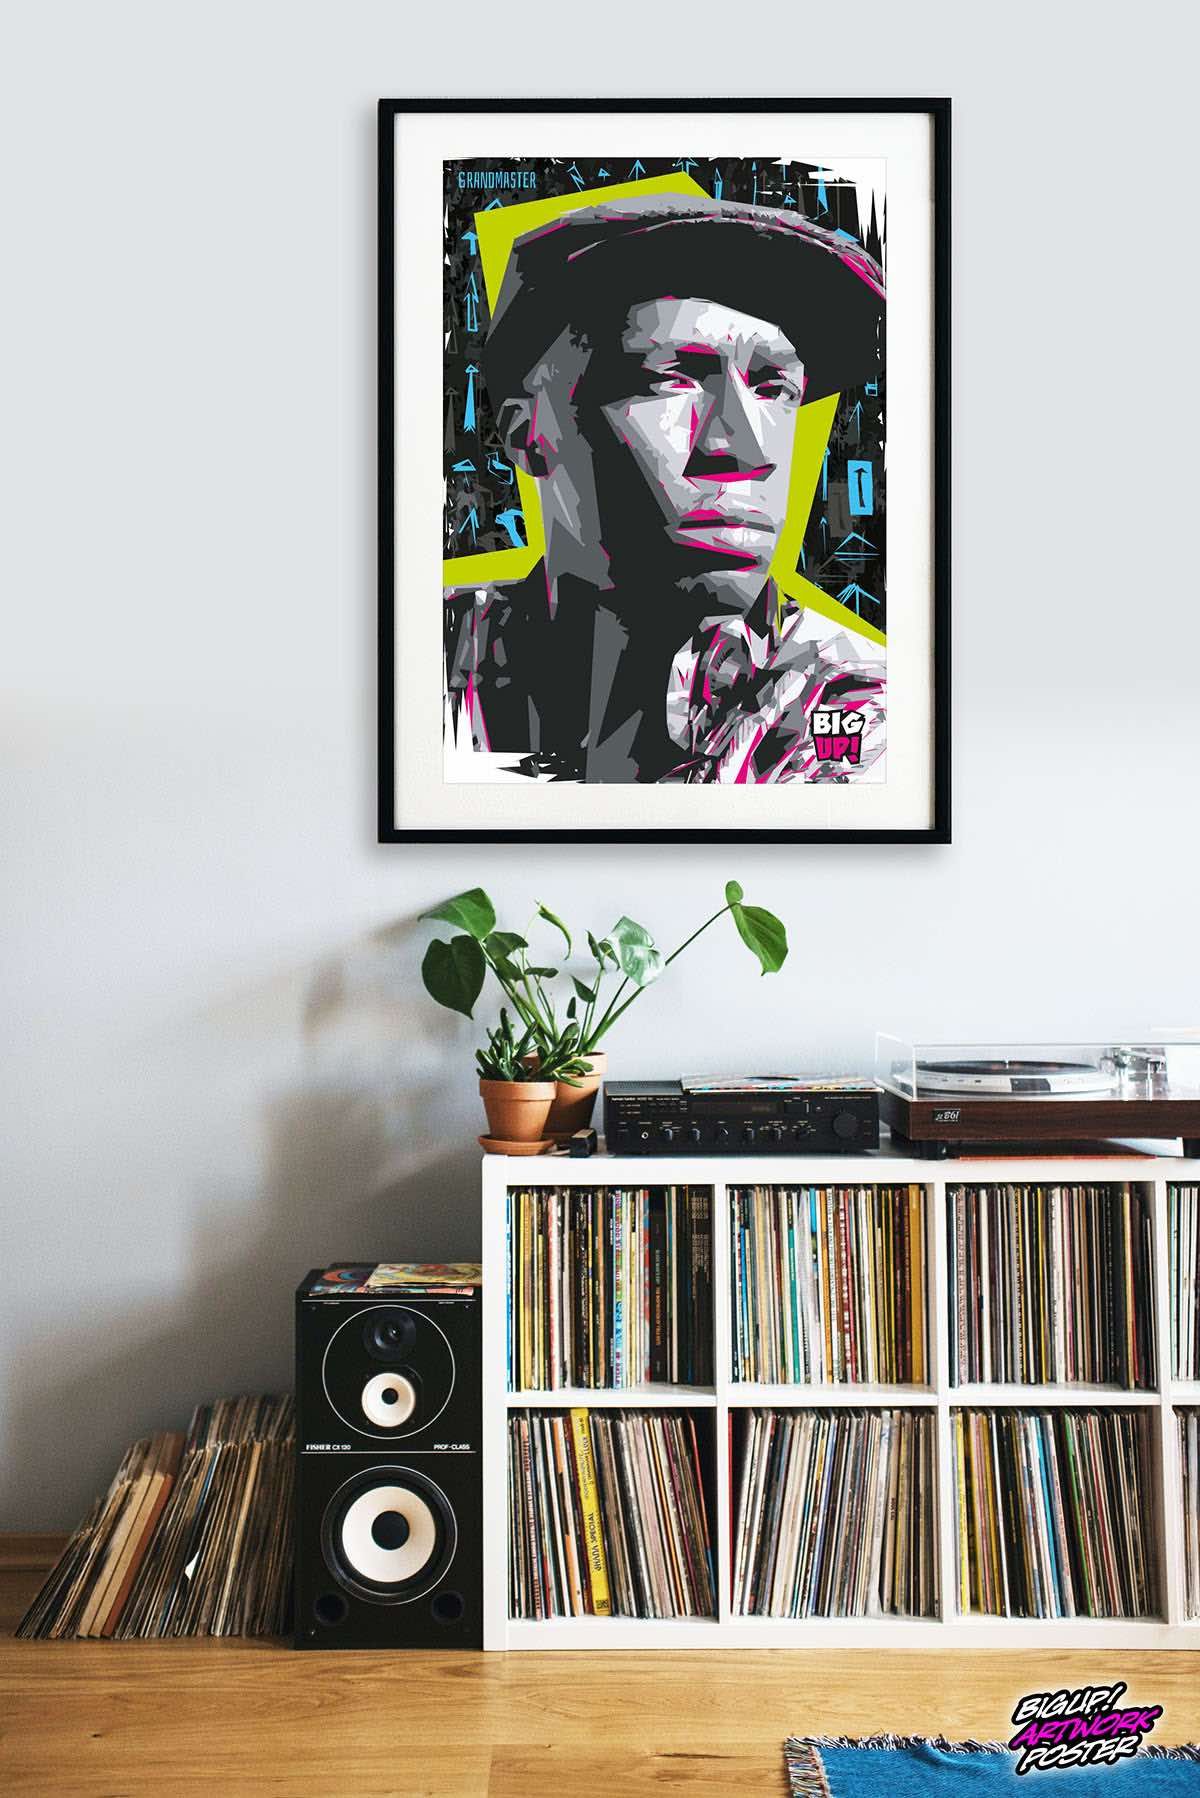 Artworkposter.com is the blog for printed limited abstract poster art by BIGUP OFFICIAL.